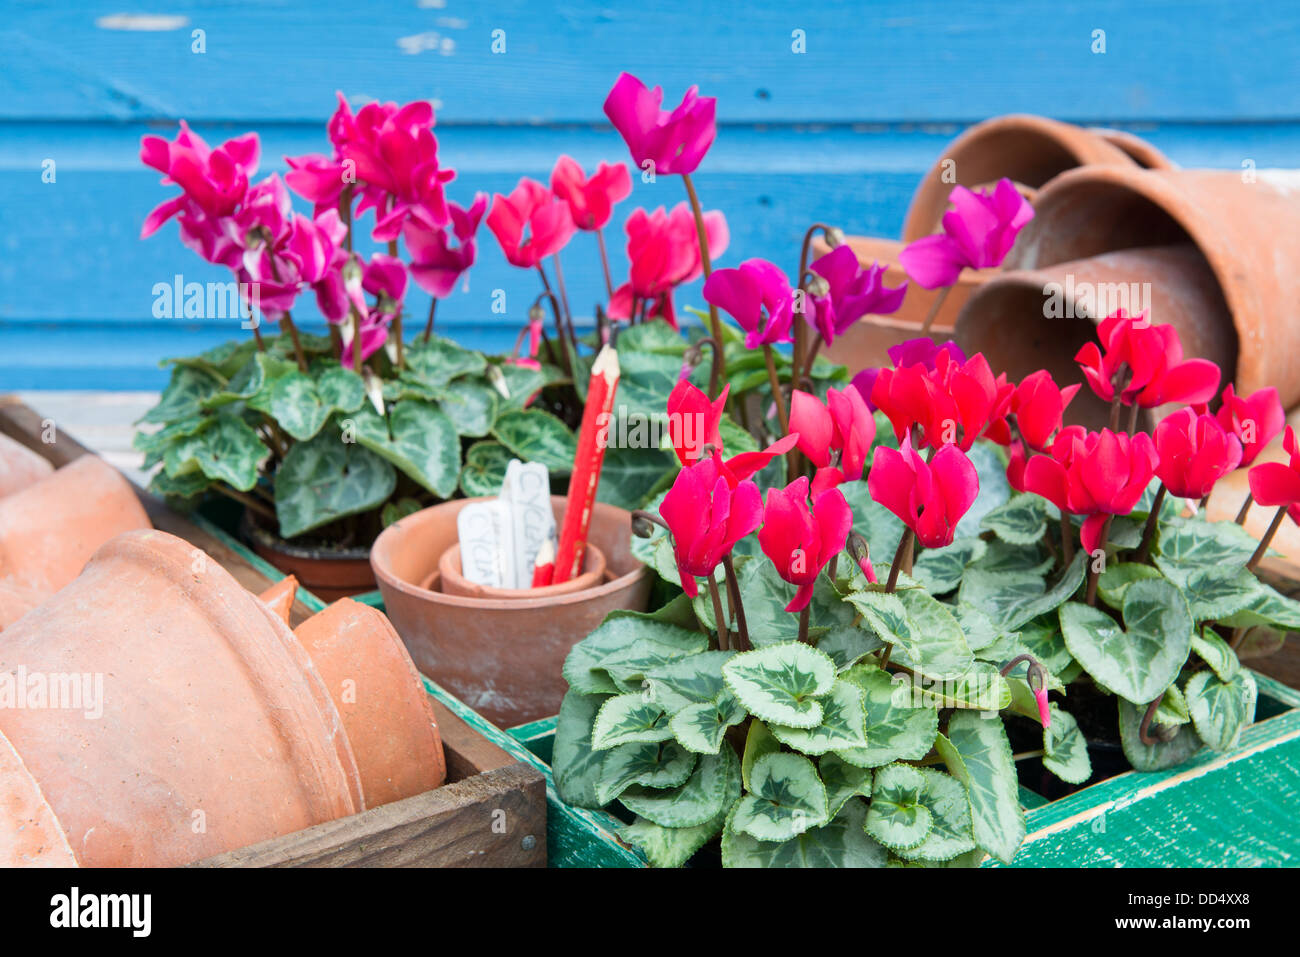 Still life of Hardy cyclamen, flowering, in pots ready for planting with plastic labels. Stock Photo